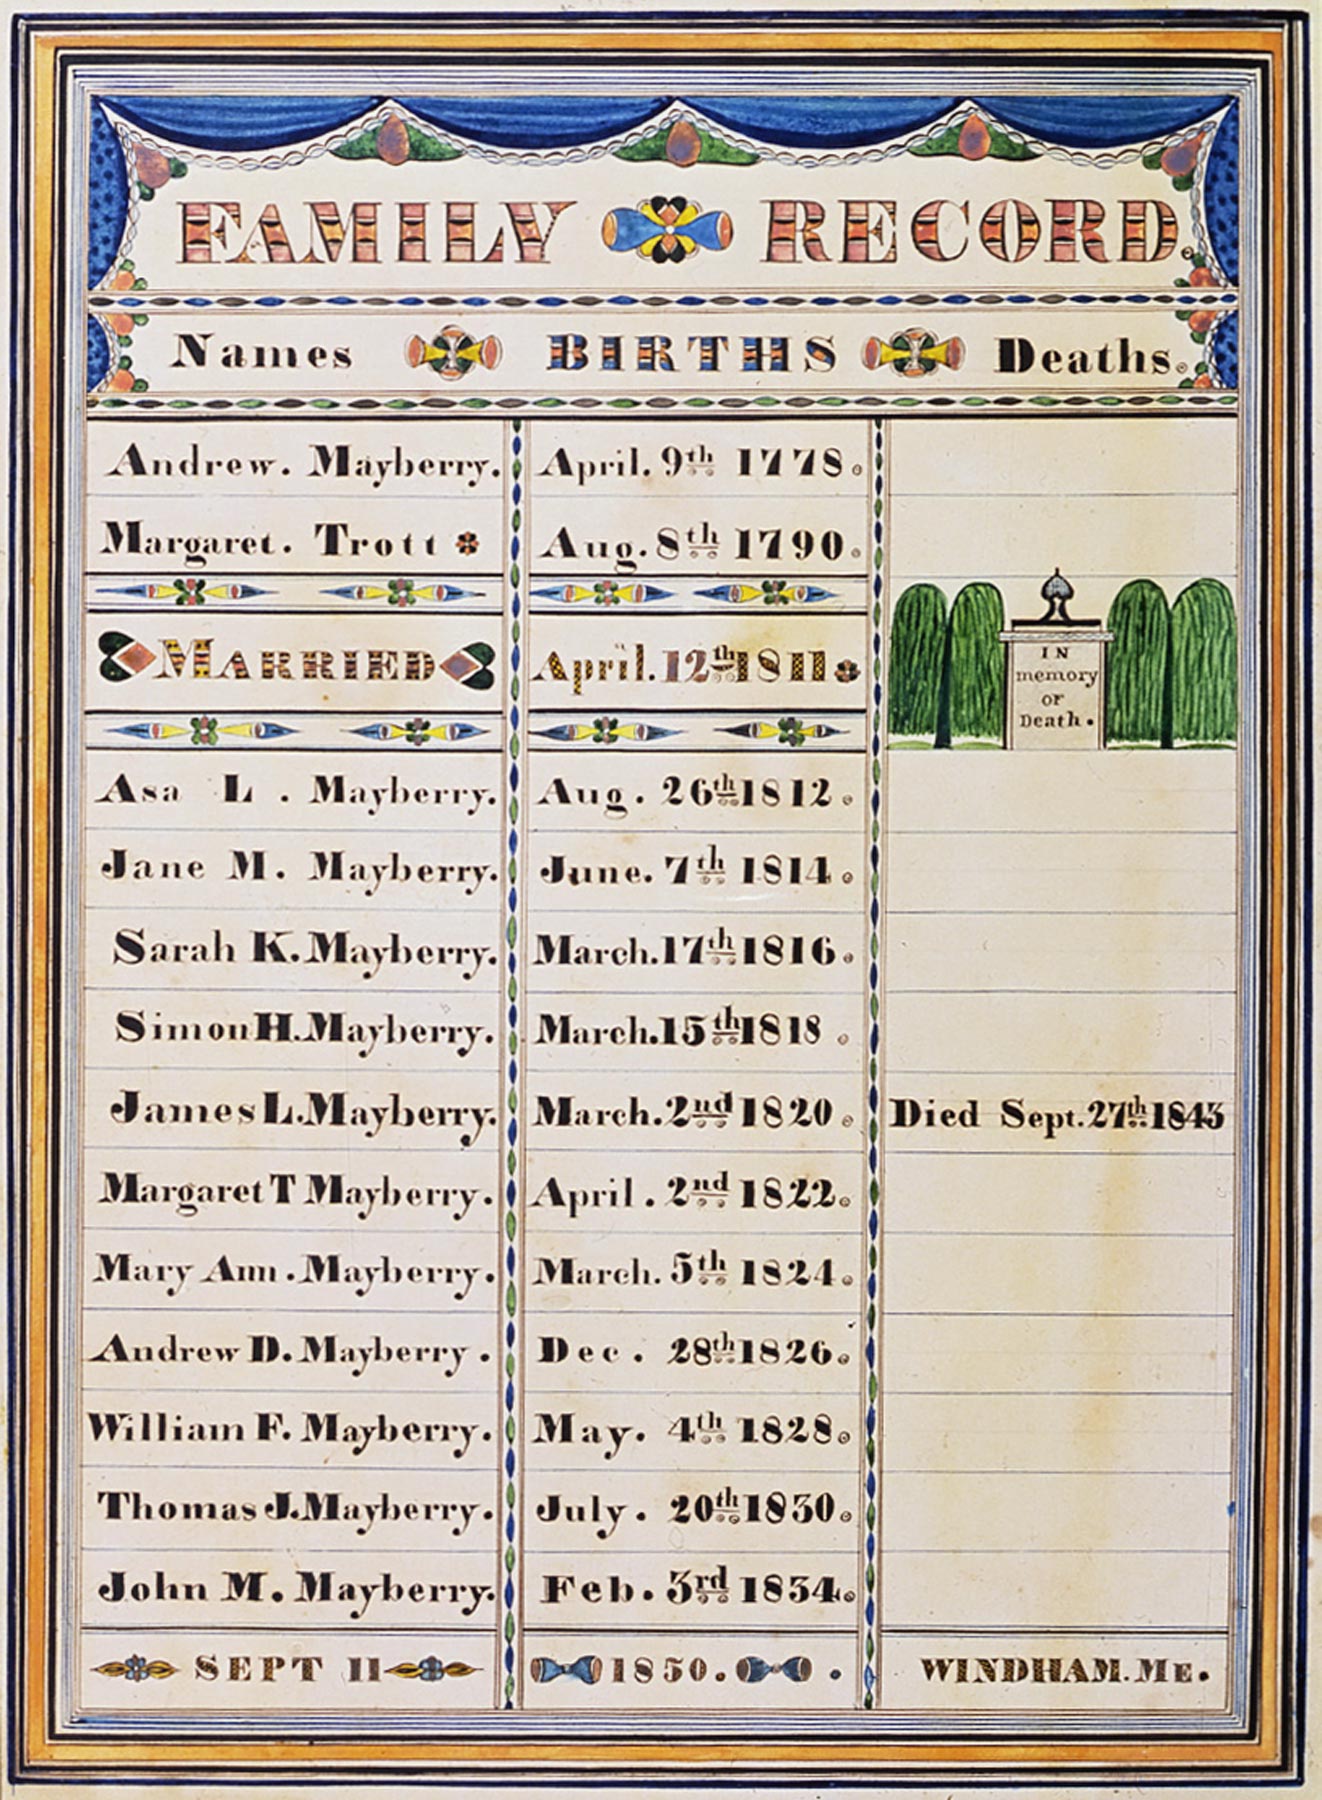 Andrew Mayberry – Margaret Trott Family Record, Windham, Maine, 1850